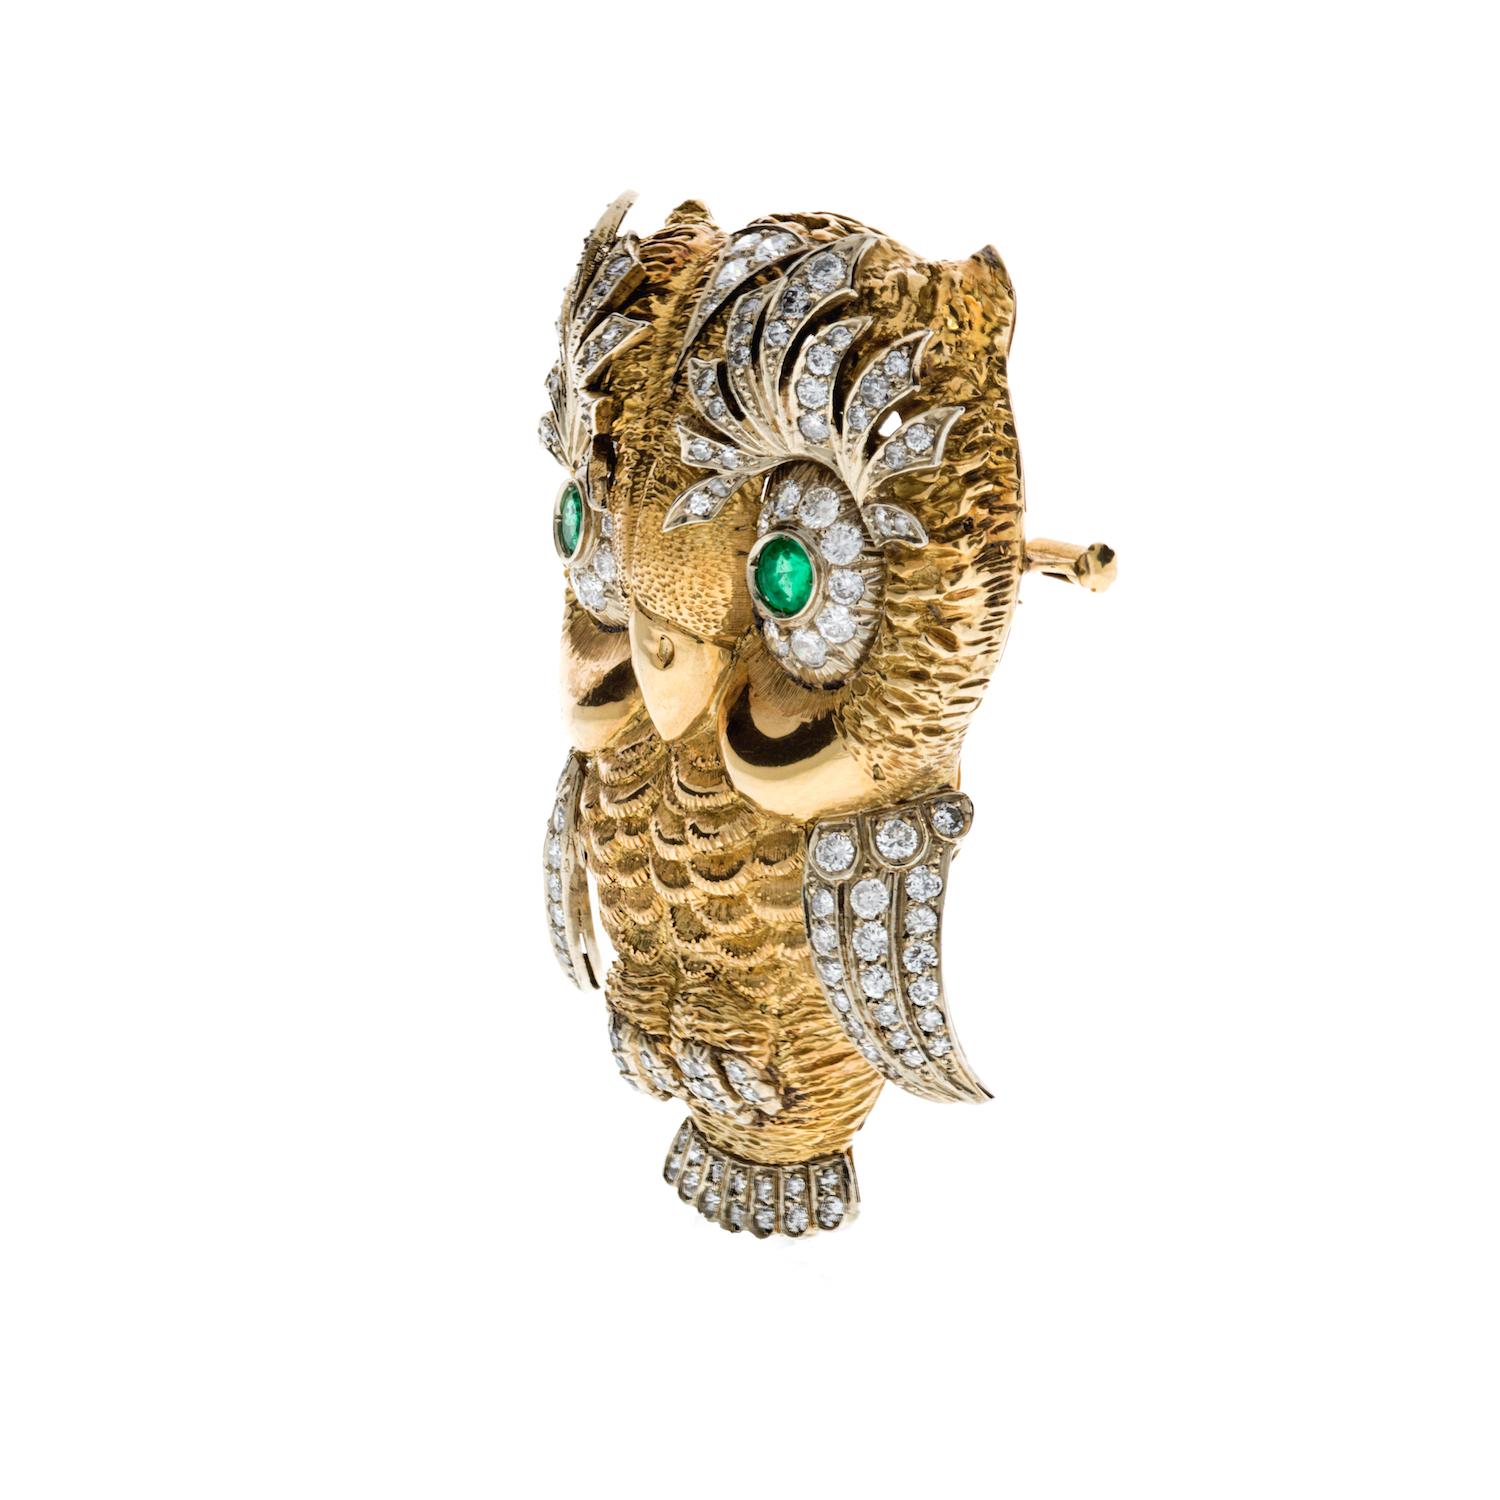 Beautiful owl brooch of significant weight and size encrusted with diamonds and set with green emerald eyes. You will fall in love with this adorable creature that has a cute look in her eyes. 

Diamonds: 1.75 carats

About 2.25 inches long. 

From